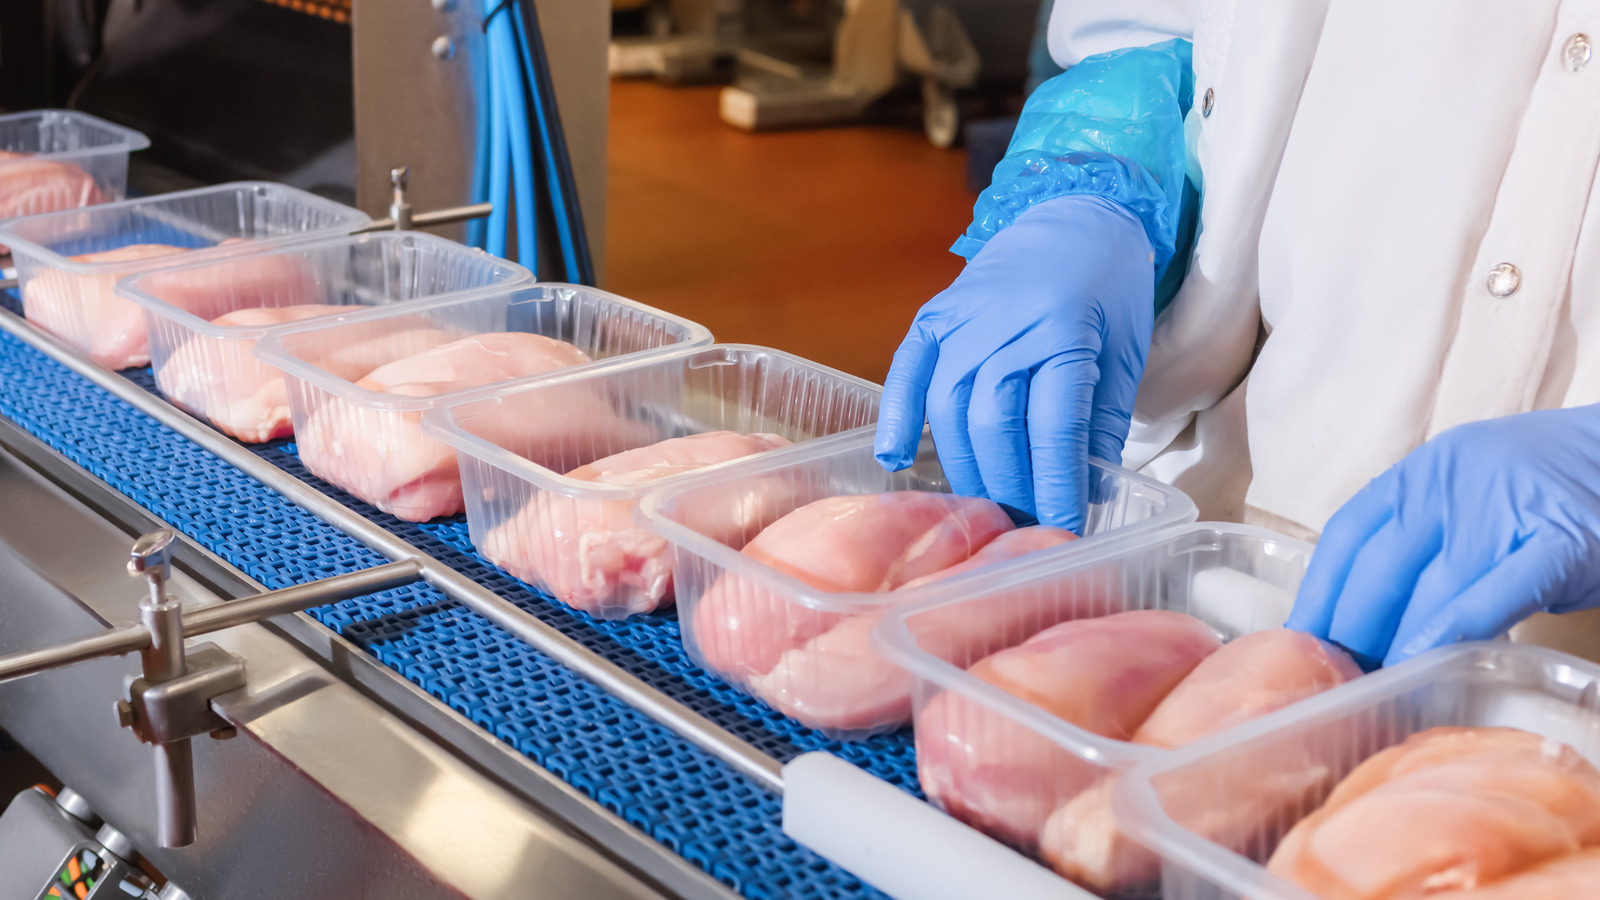 Lab-Grown Chicken Could Be Hitting Shelves Sooner Than You Think – Mashed